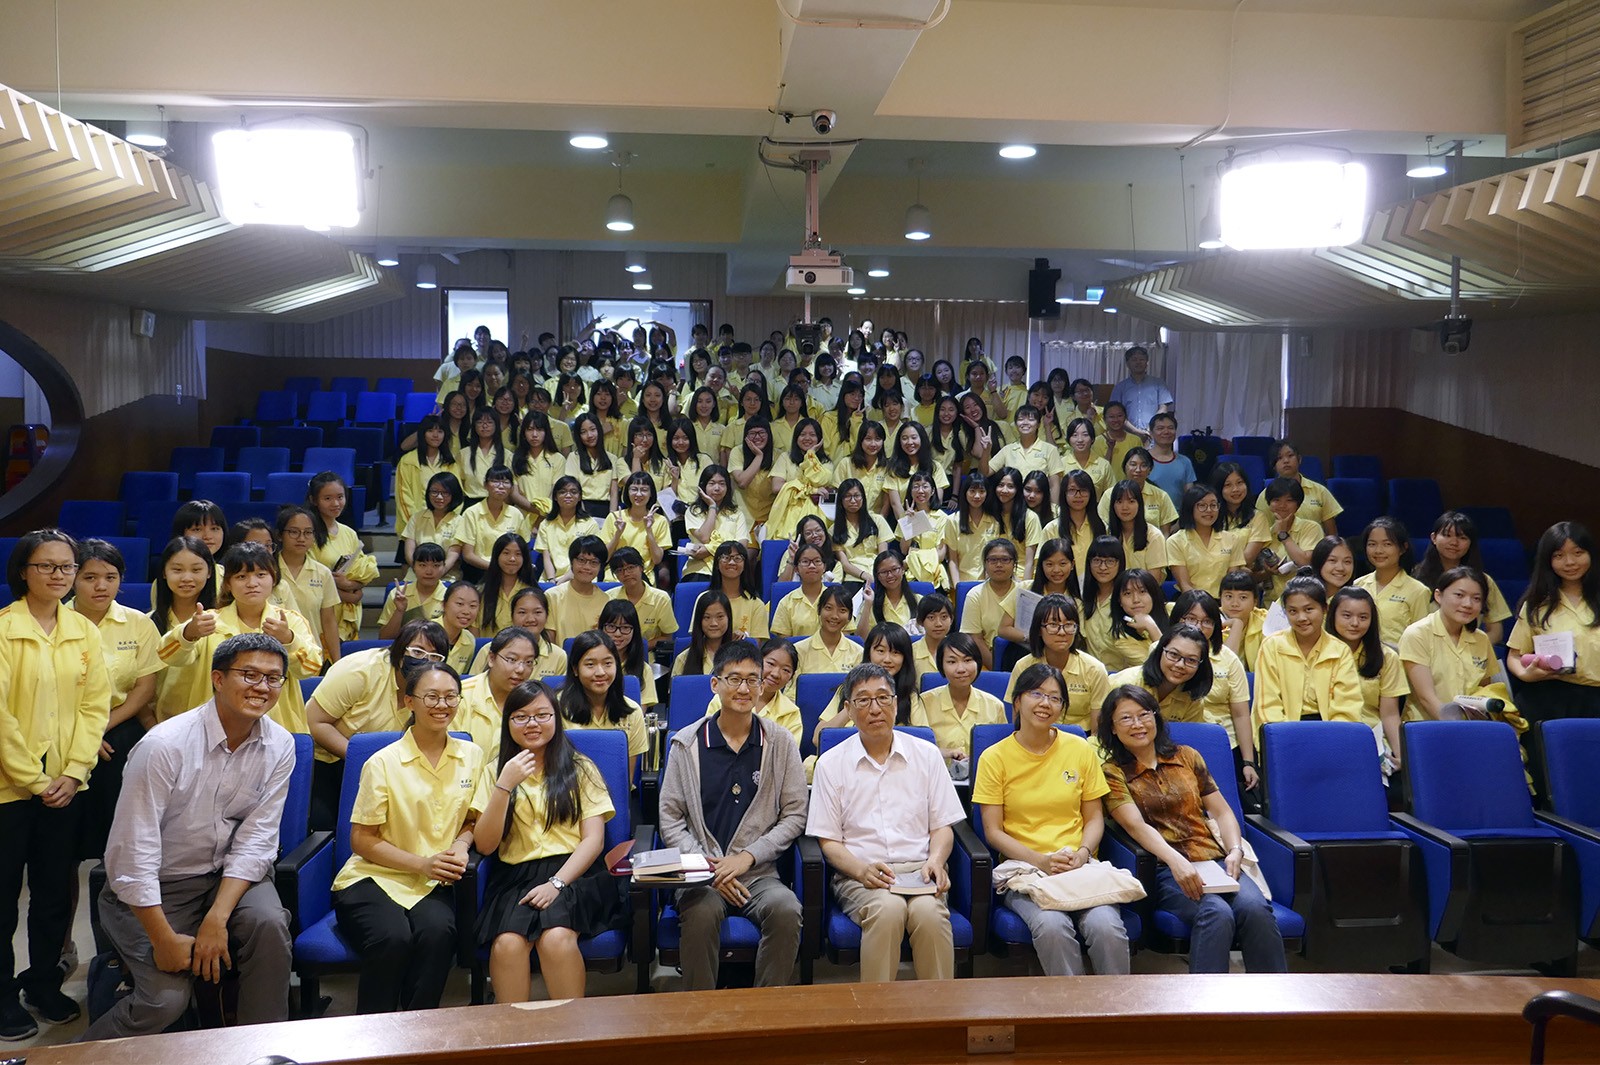 Professor Kuo (third from right in front row) delivered a talk at Taipei JingMei Girls High School.